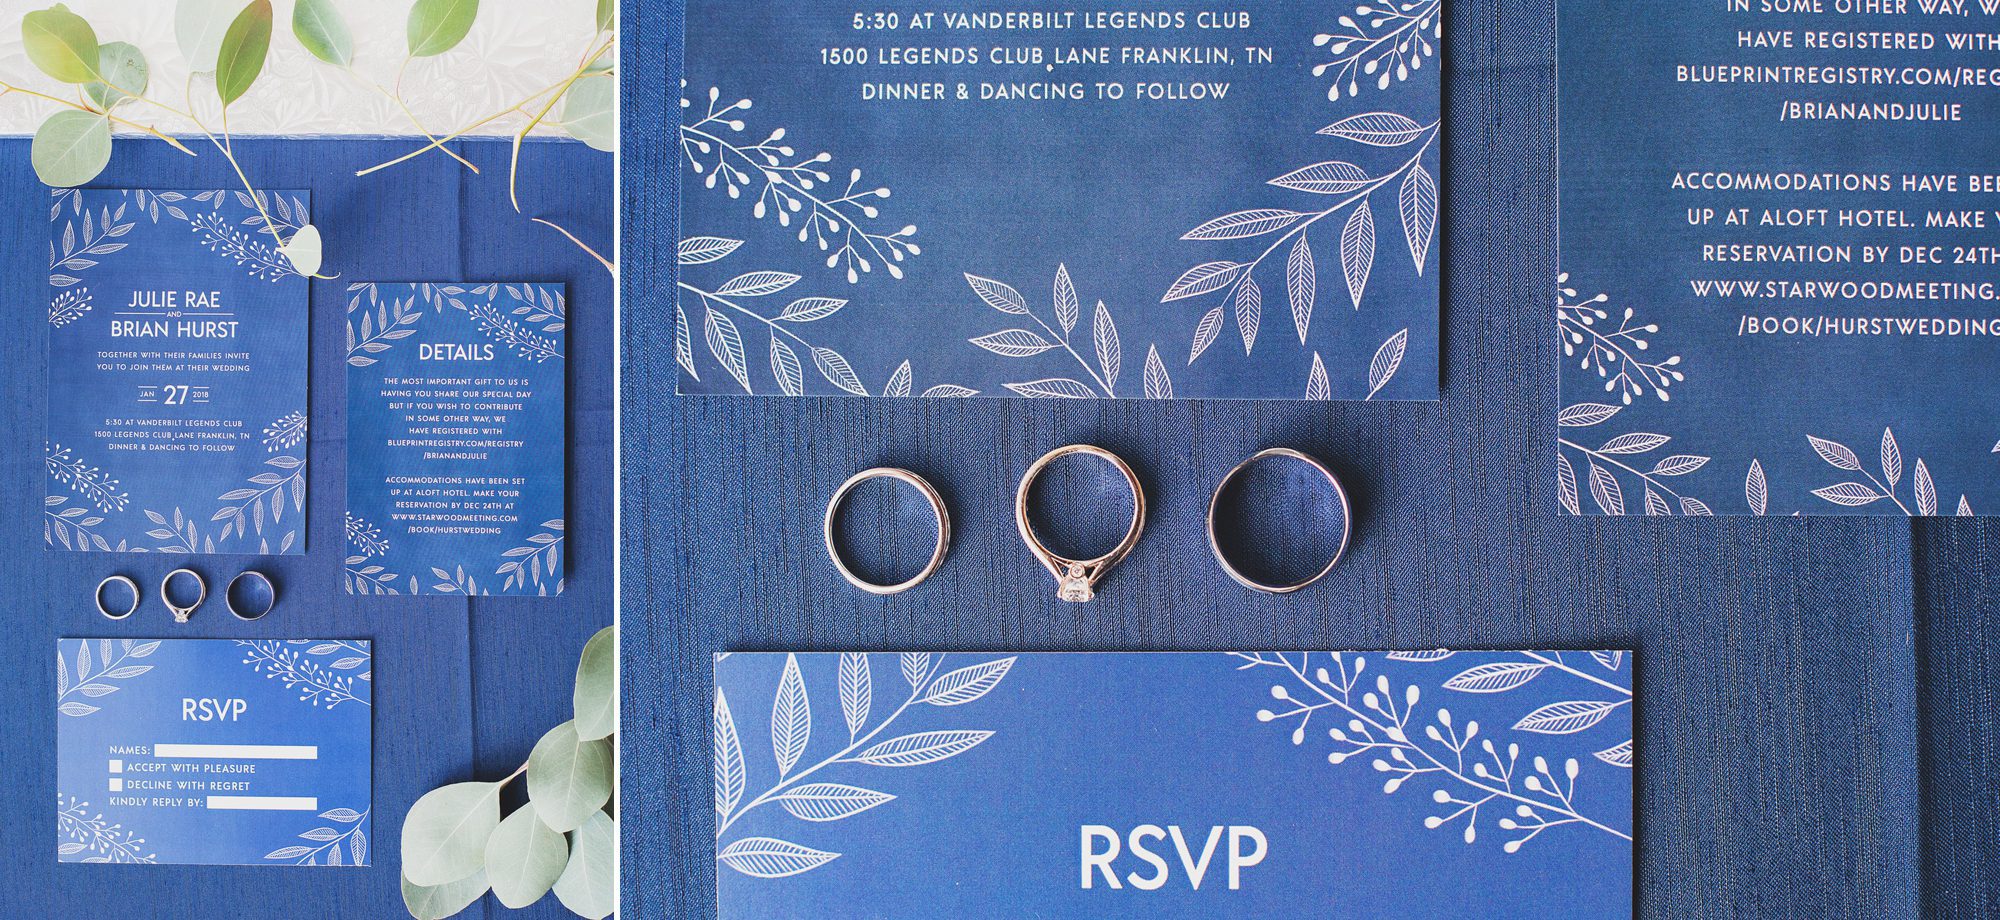 Navy blue wedding invitations and rings before wedding ceremony. Winter wedding at Vanderbilt Legends Golf Course in Brentwood TN, photos by Krista Lee Photography